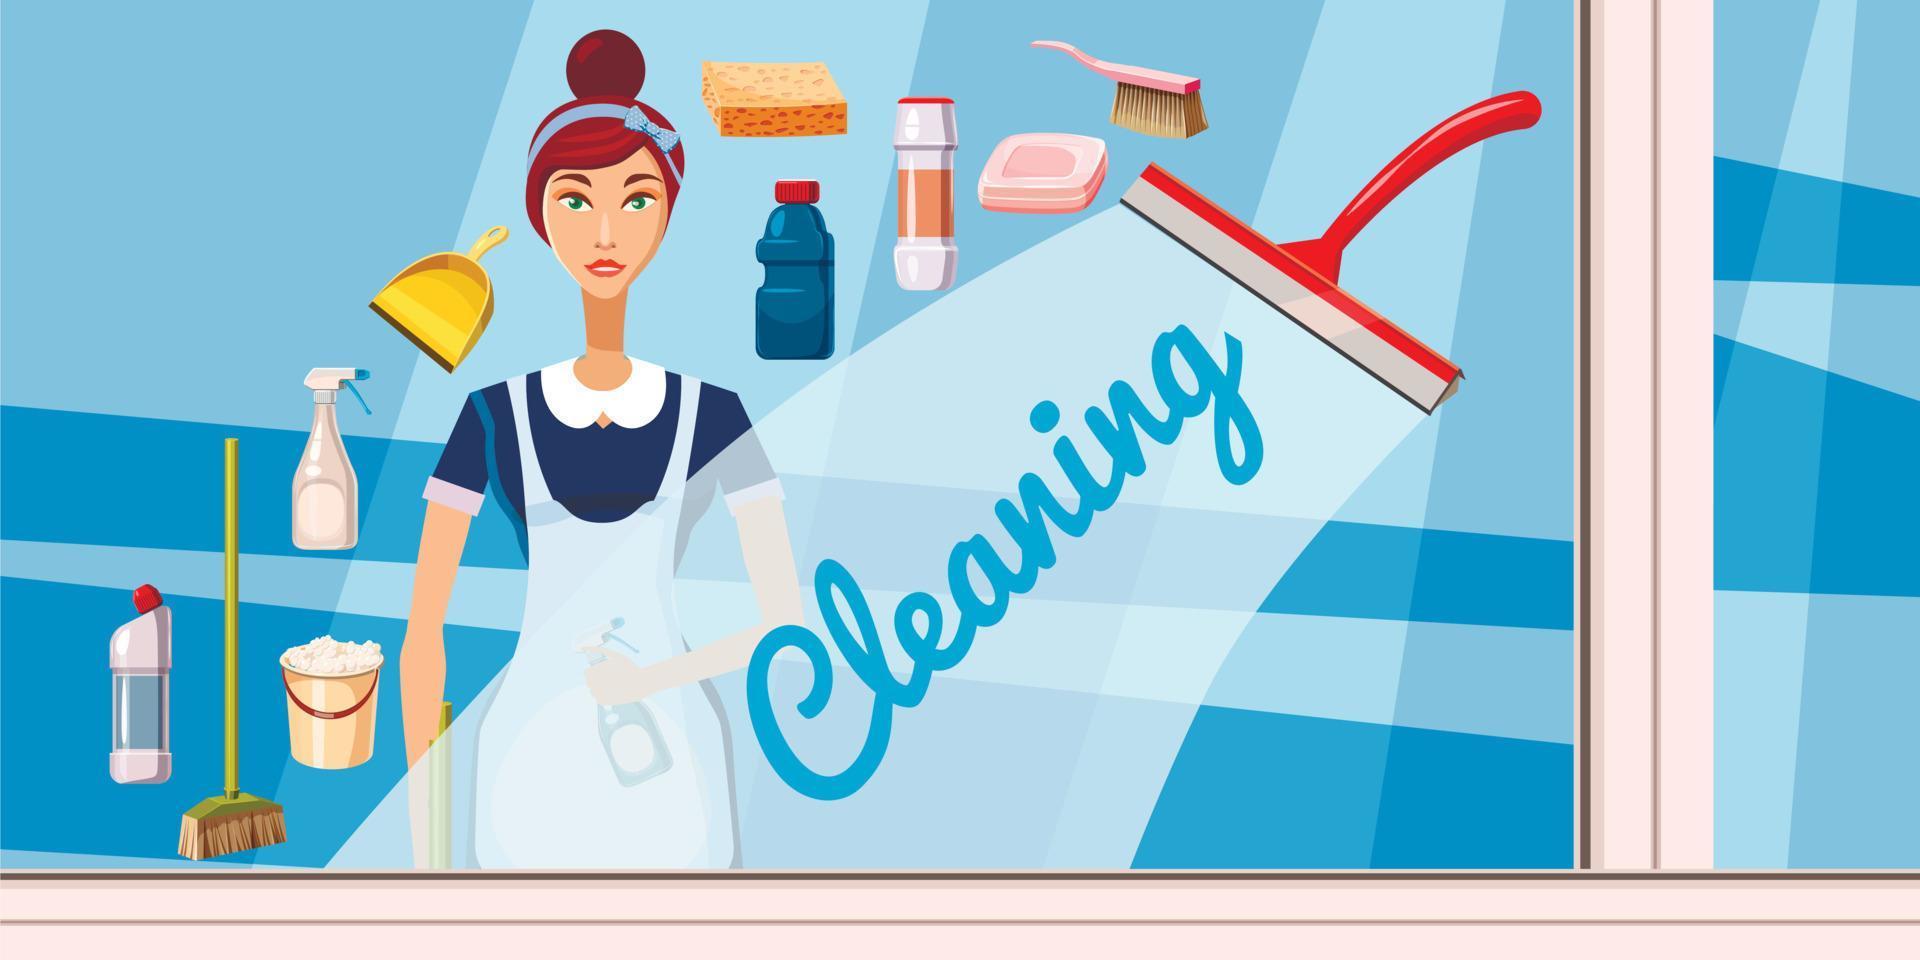 Cleaning girl banner horizontal, cartoon style vector